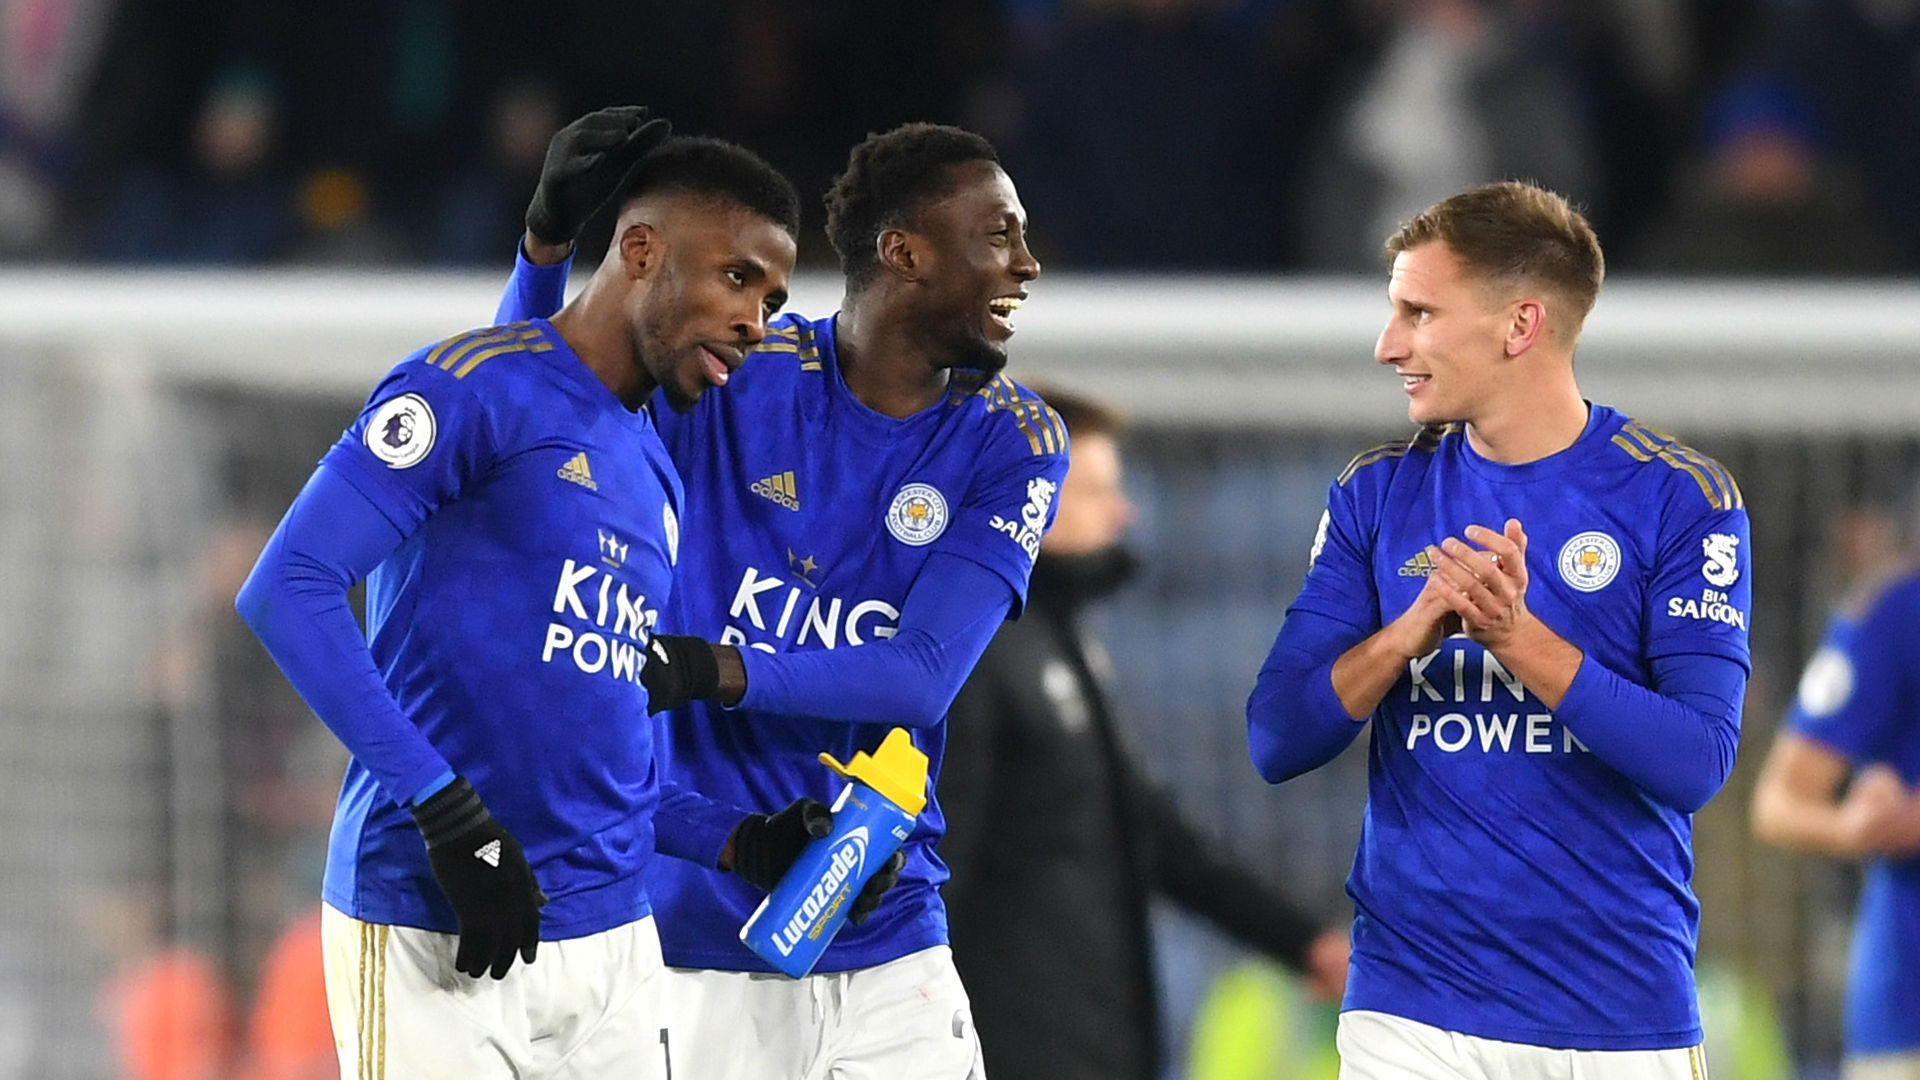 Leicester City forward Iheanacho hails Ndidi as a ‘great passer of the ball’